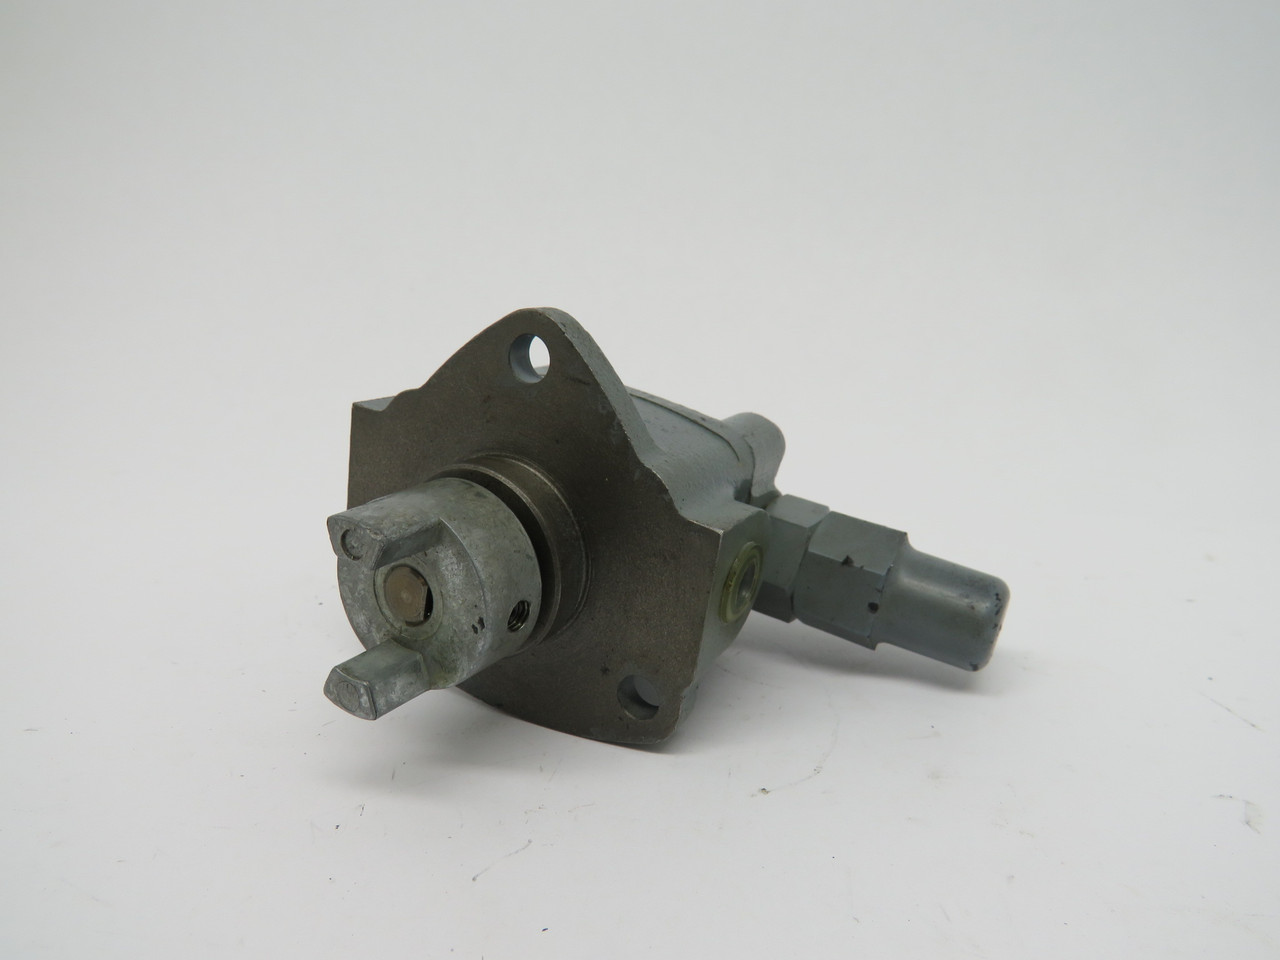 Nippon Oil Pump TOP-10MAVB Trochoid Pump With Relief Valve USED